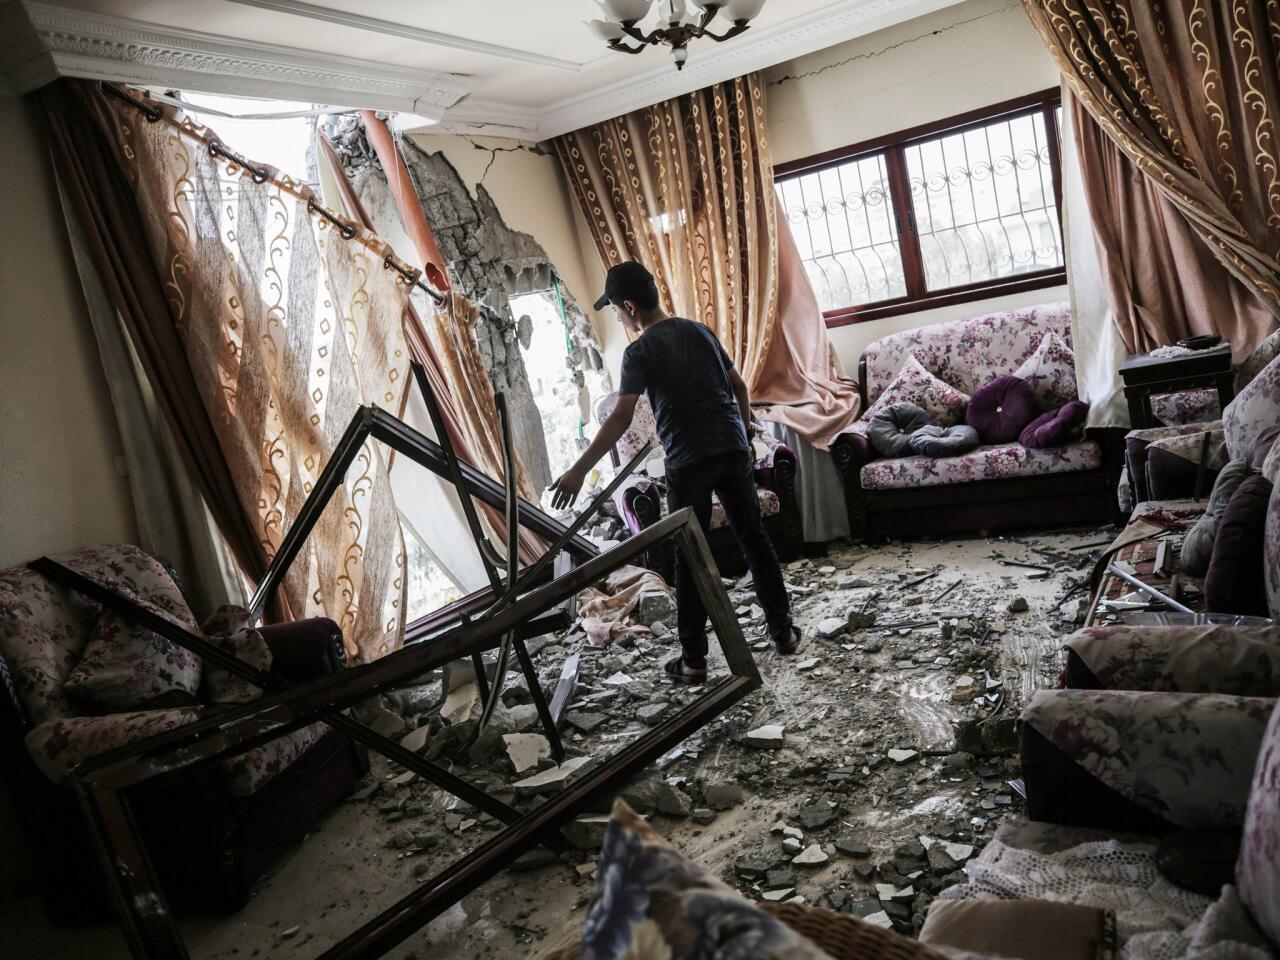 A Palestinian man stands amid the rubble of his home, which was damaged in an Israeli airstrike in Gaza City.